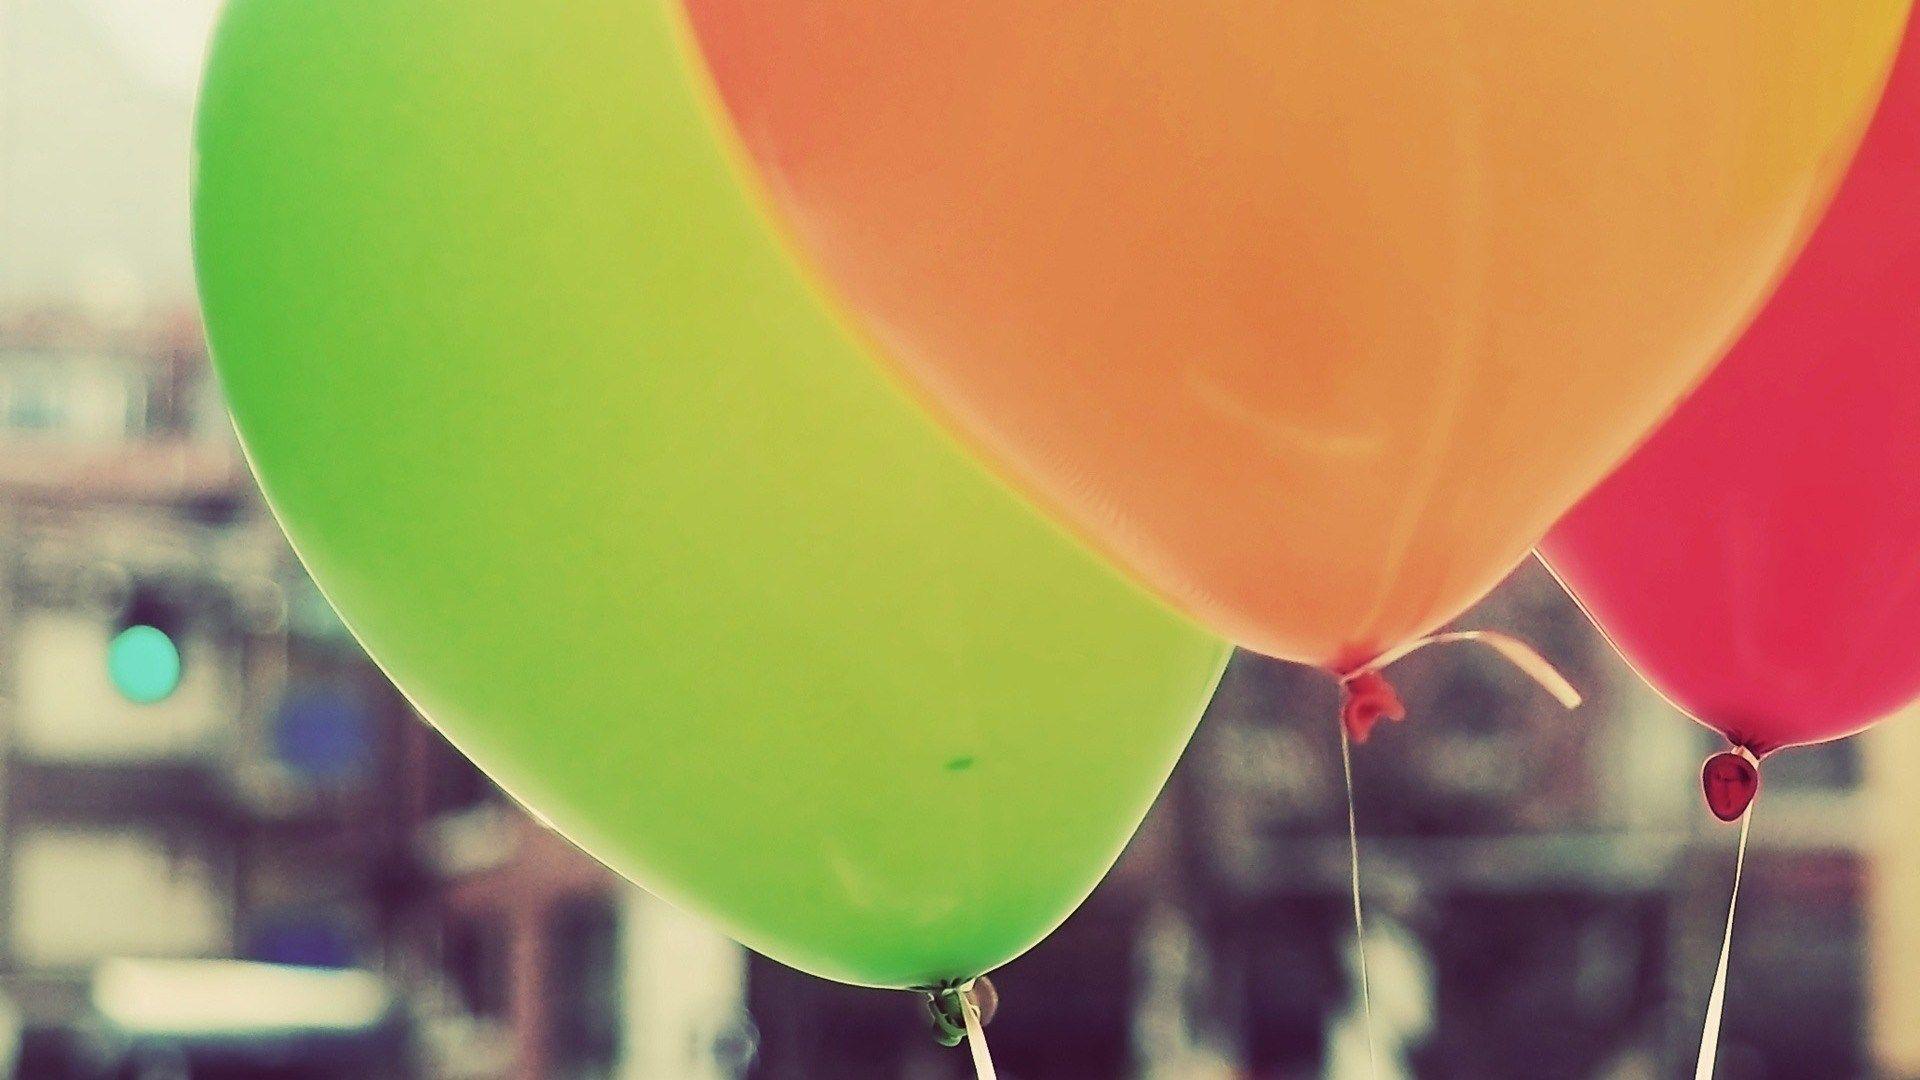 Balloons Wallpaper HD Picture